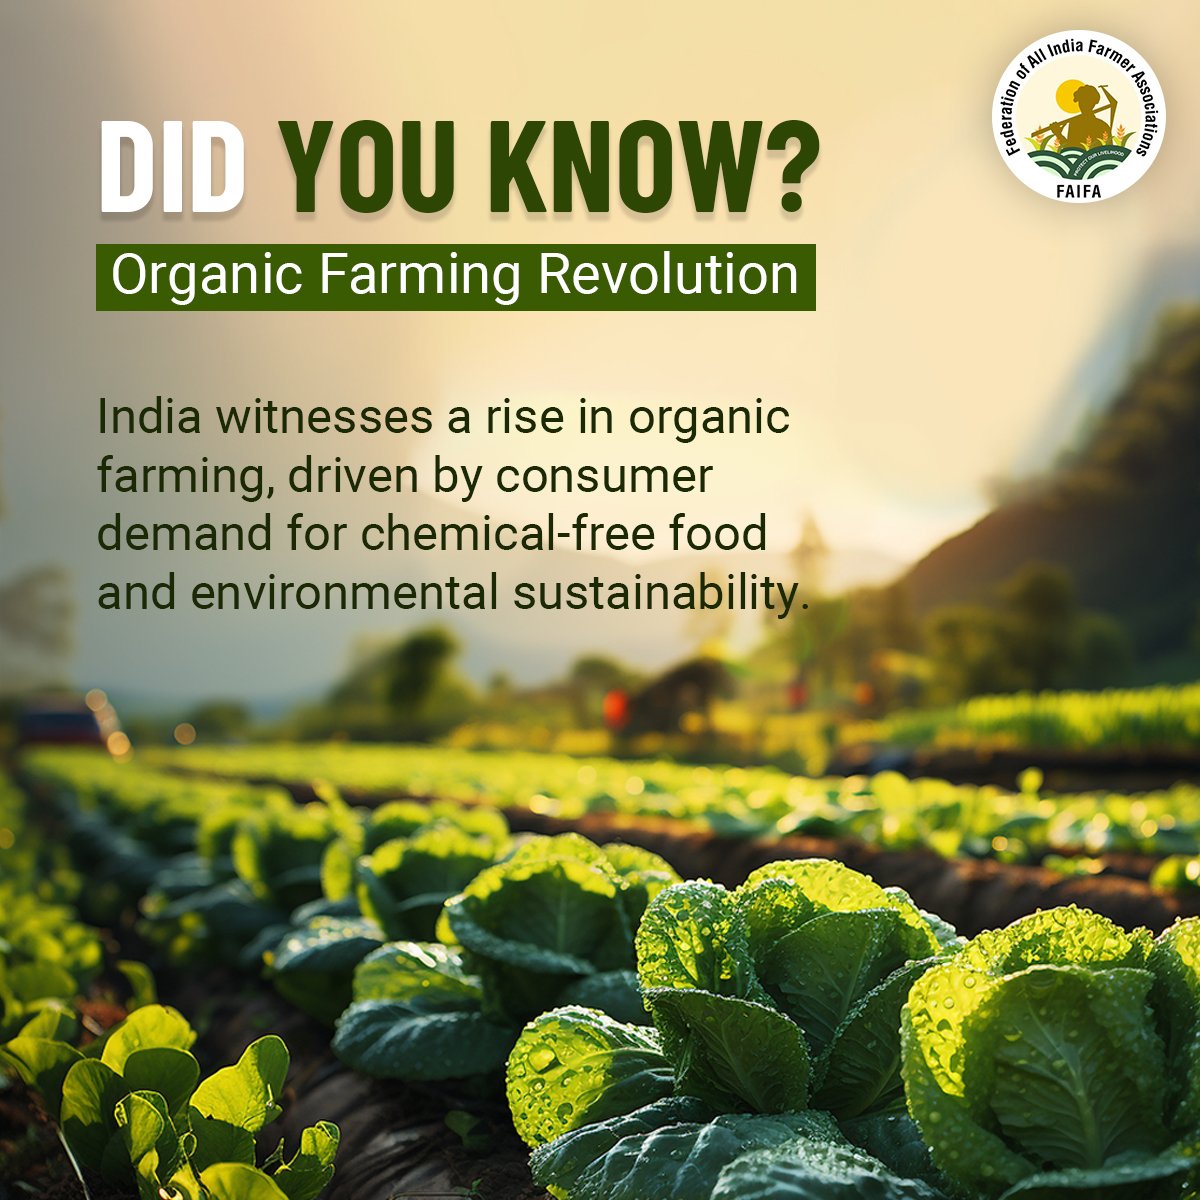 India Embraces Organic Farming for Health and Sustainability.

#OrganicFarming #DidYouKnow #AgriFacts #Sustainability
#SustainableFarming #agriculture